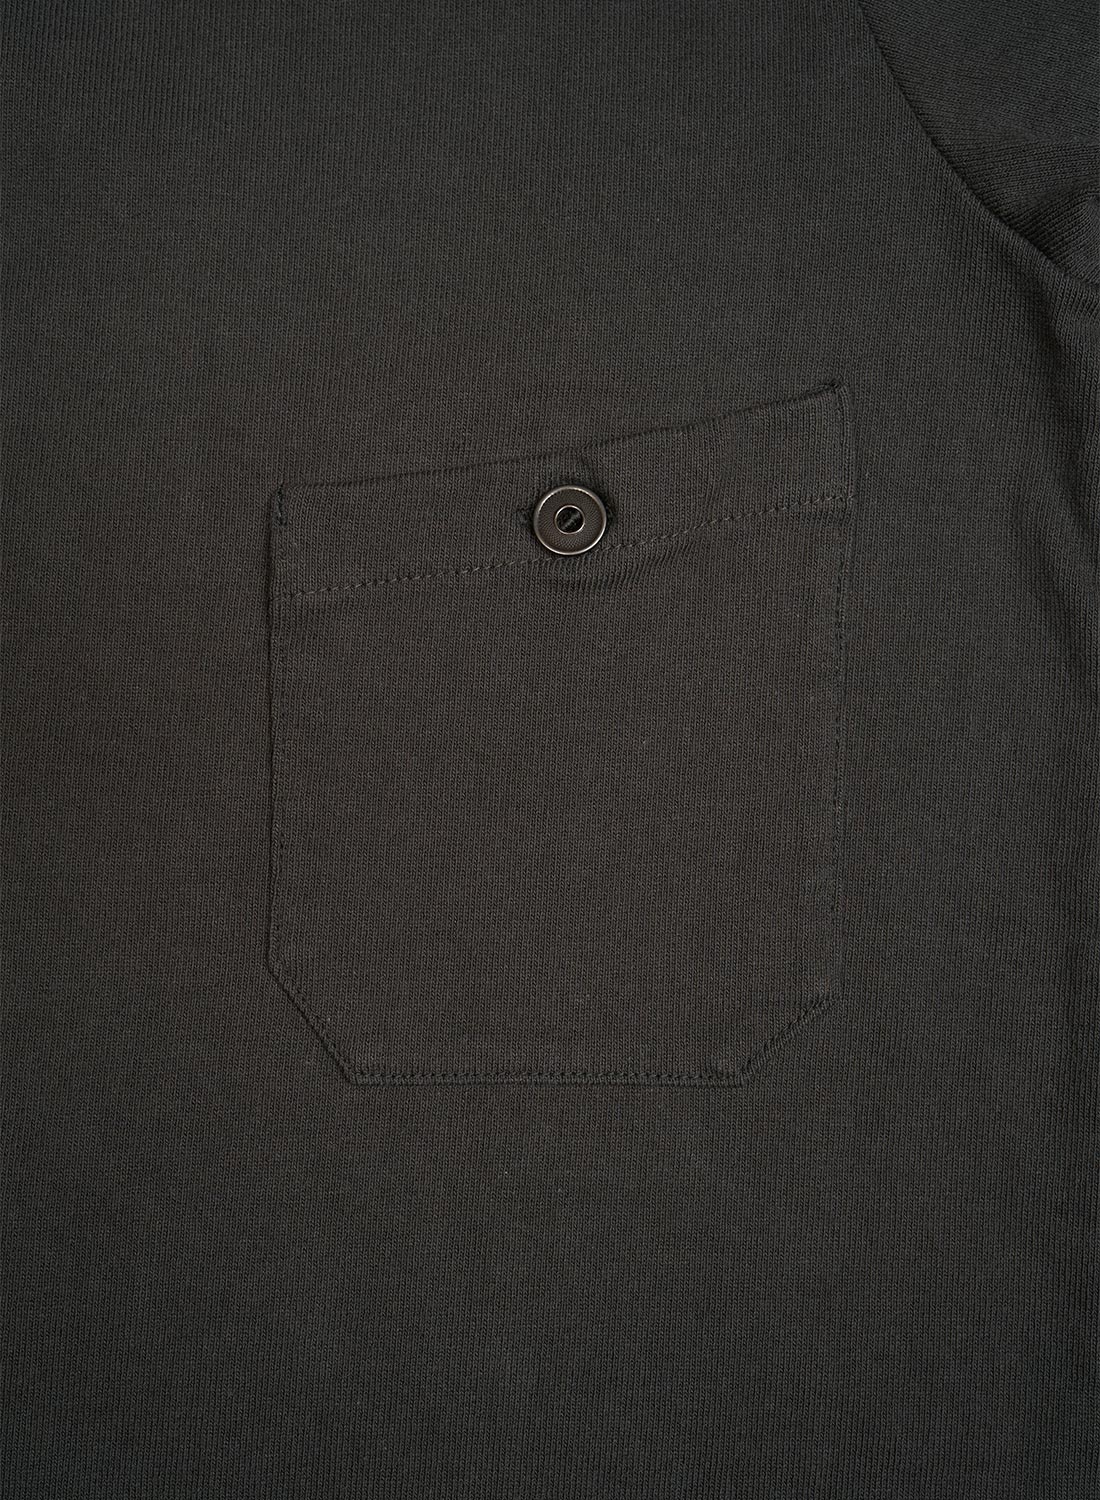 Rugger Shirt New Zealand Type in Charcoal Grey - 3